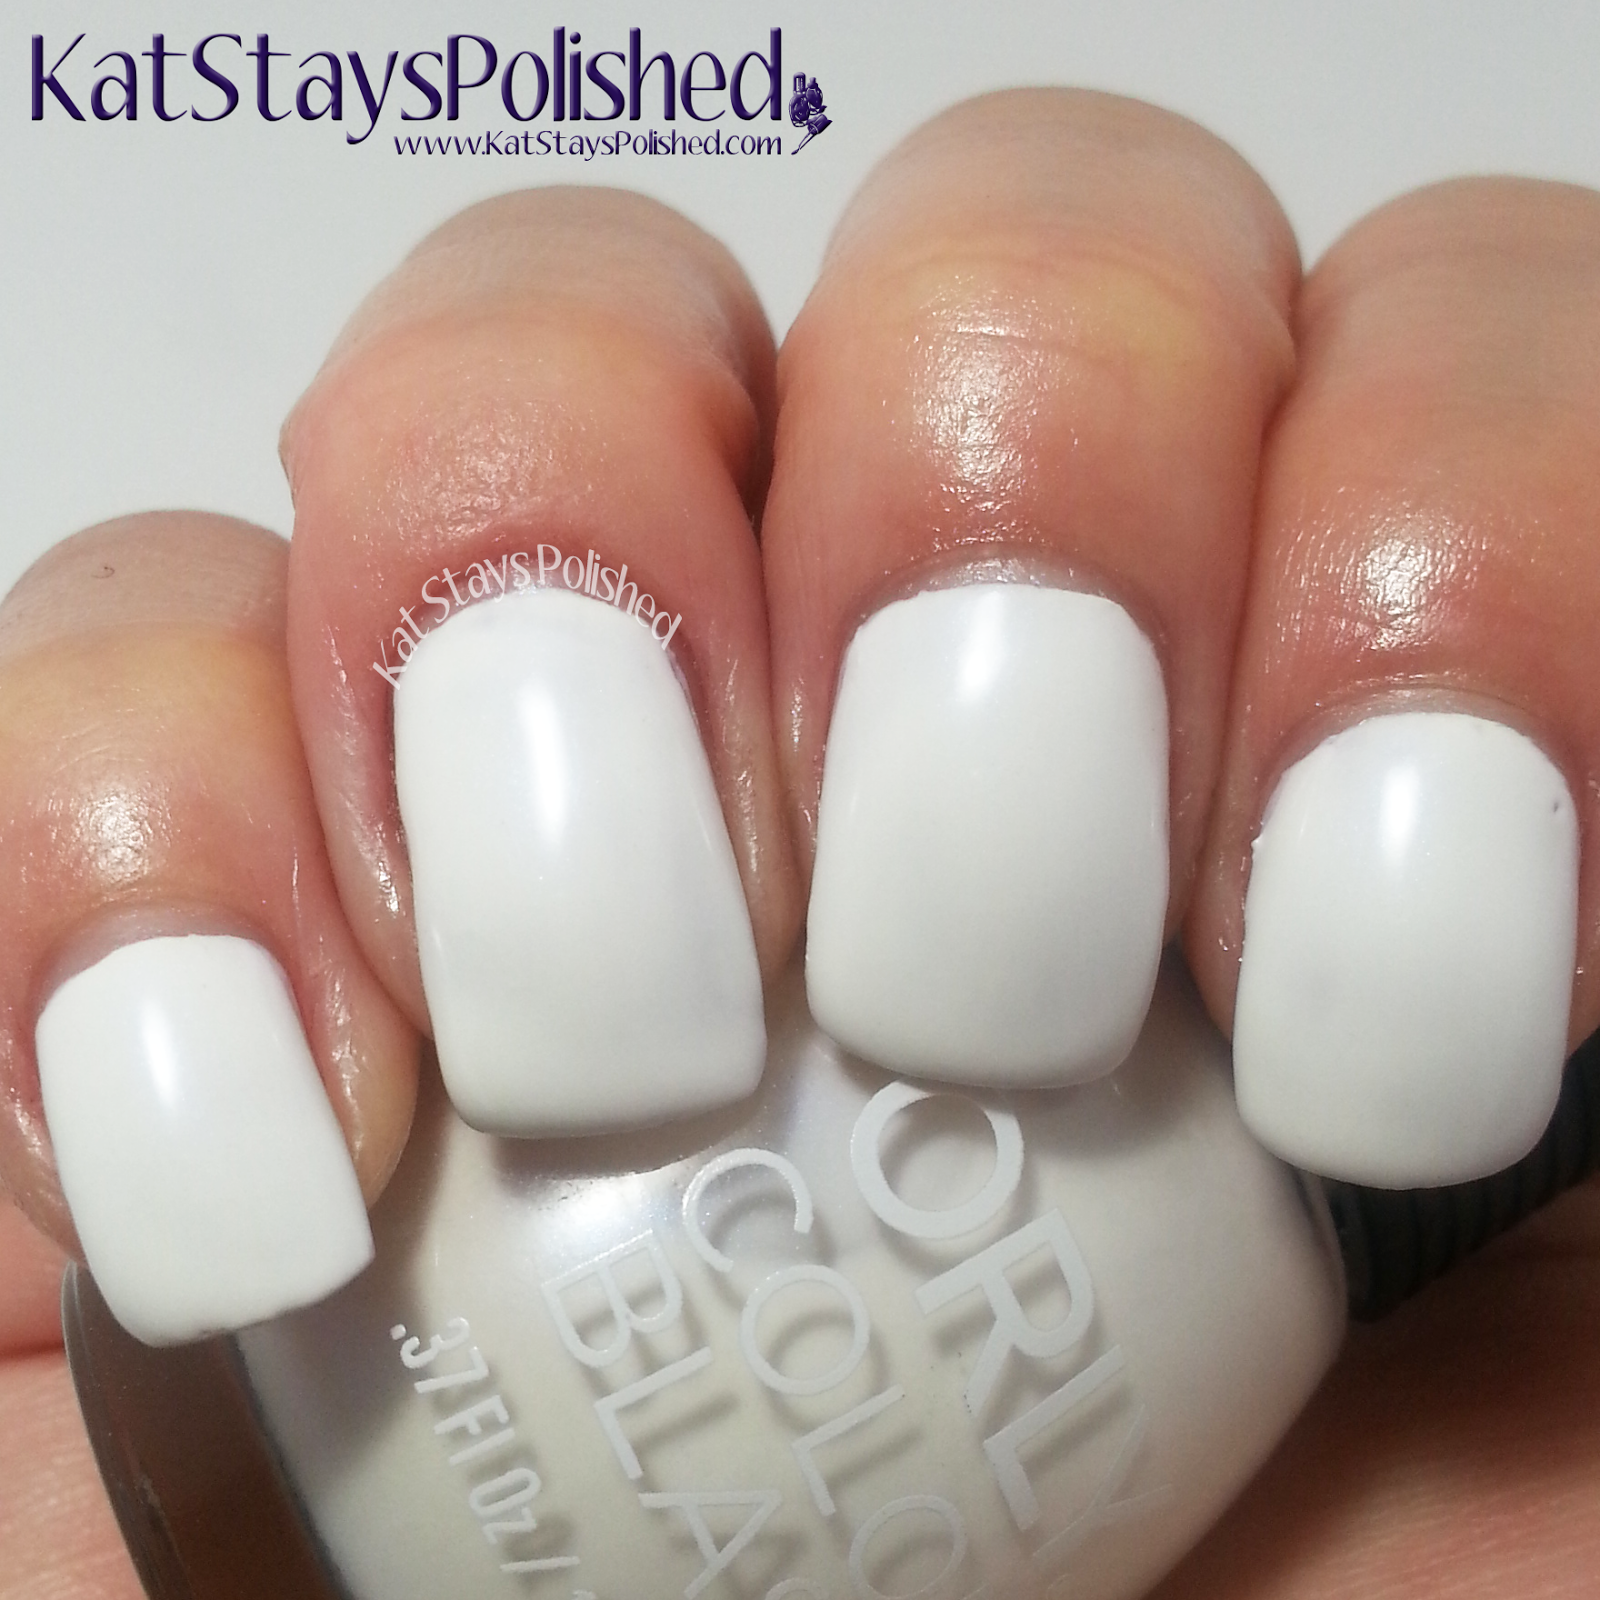 Orly Color Blast - Disney's Frozen Elsa Collection - Snow Queen | Kat Stays Polished